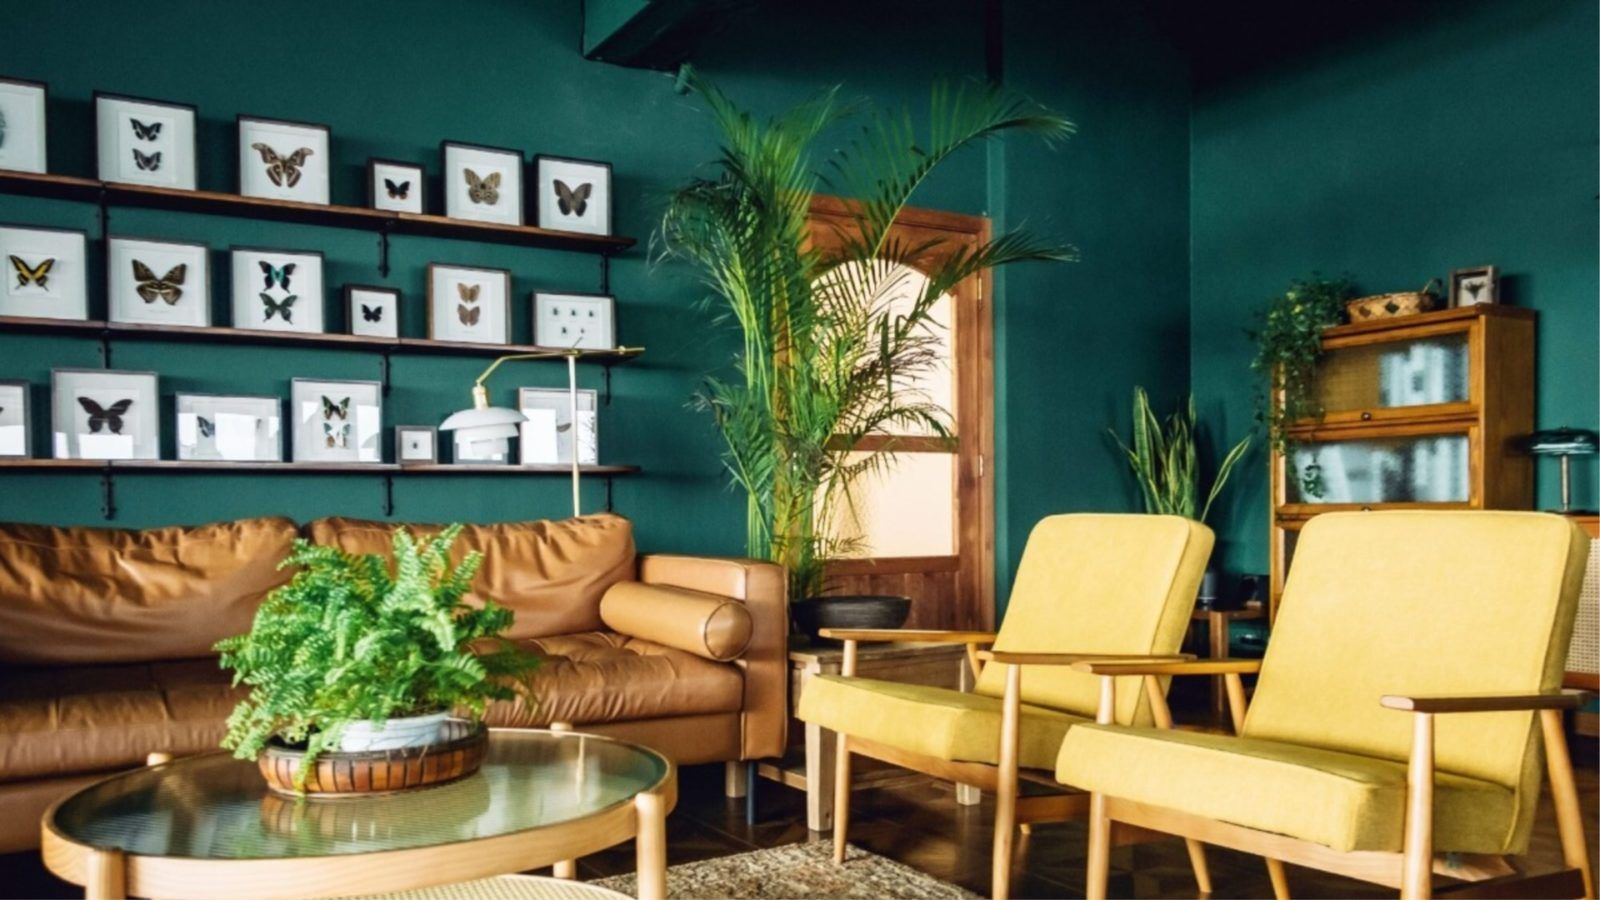 The most popular paint colours for every room in your house, according to Google